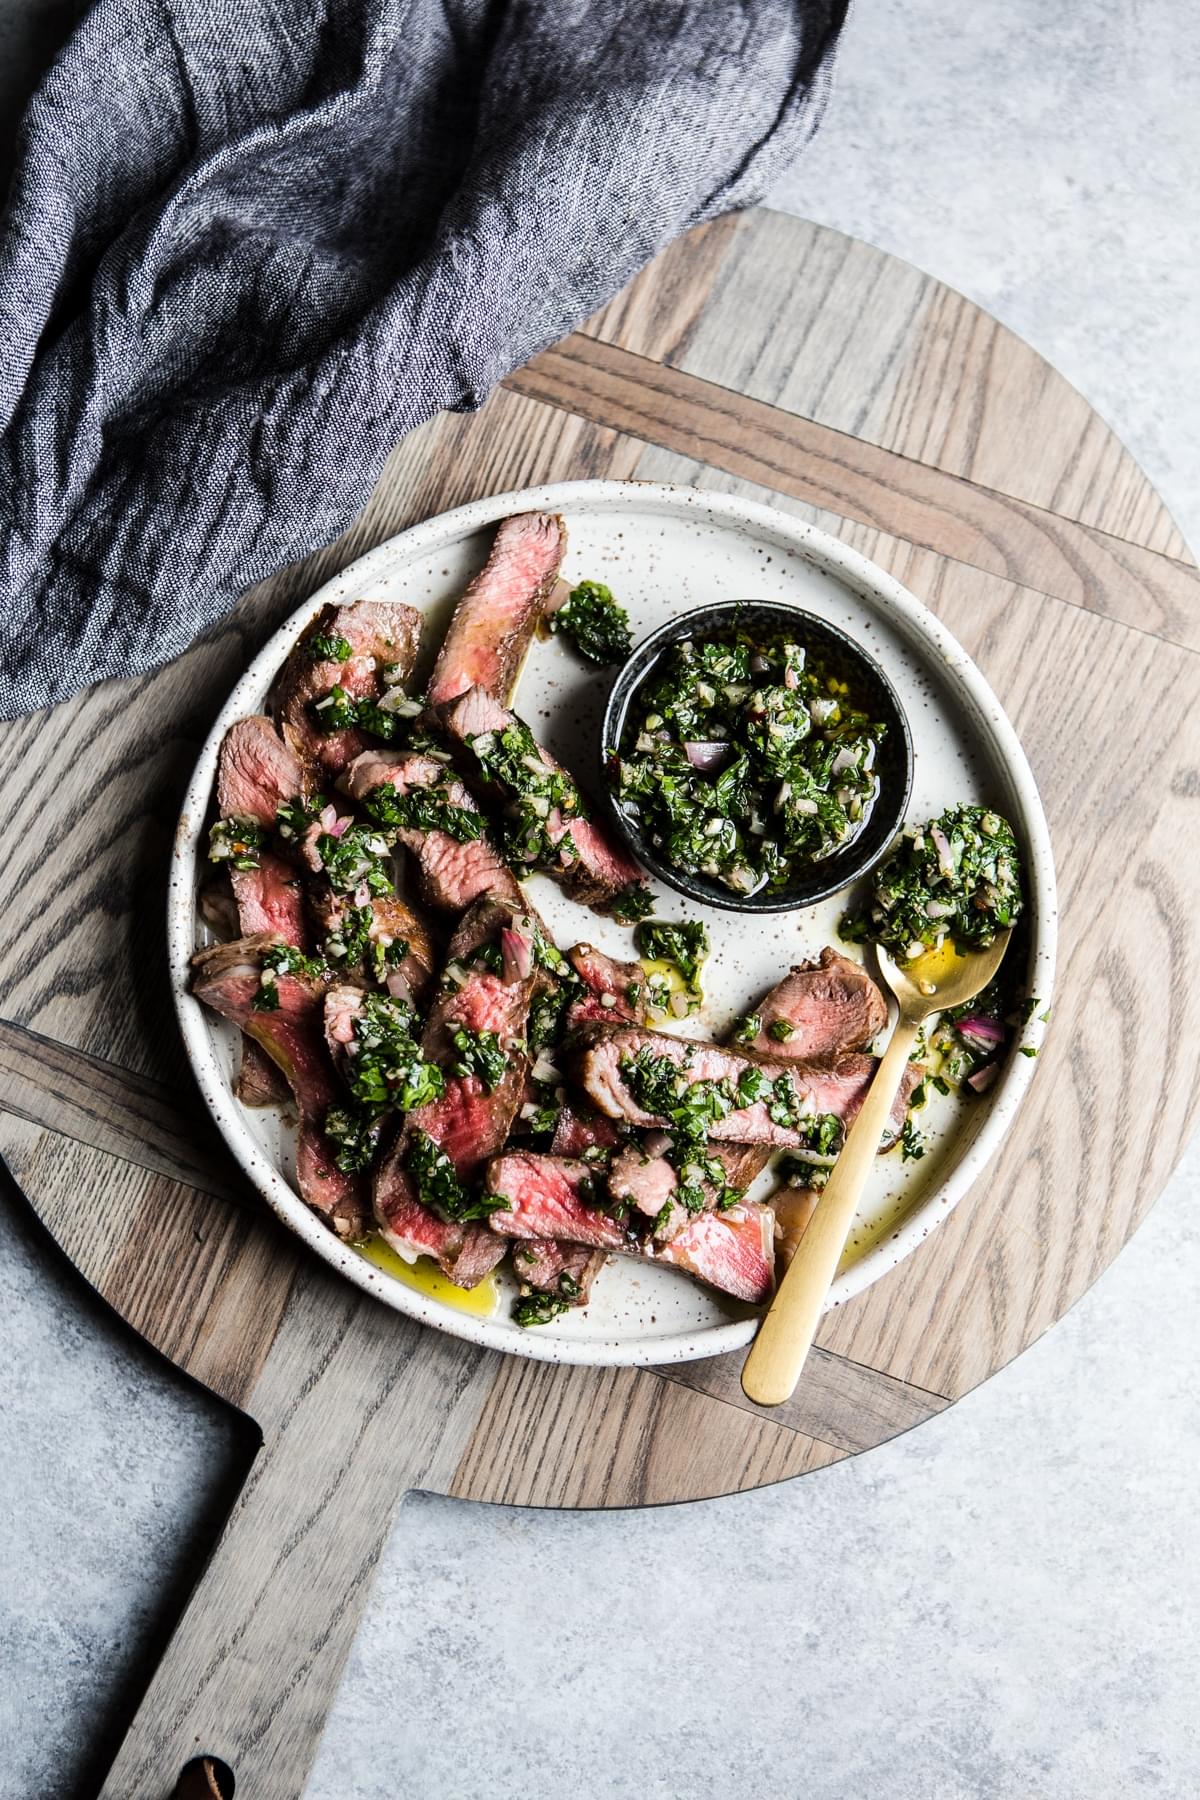 A plate of flank steak cooked medium drizzled with chimichurri sauce